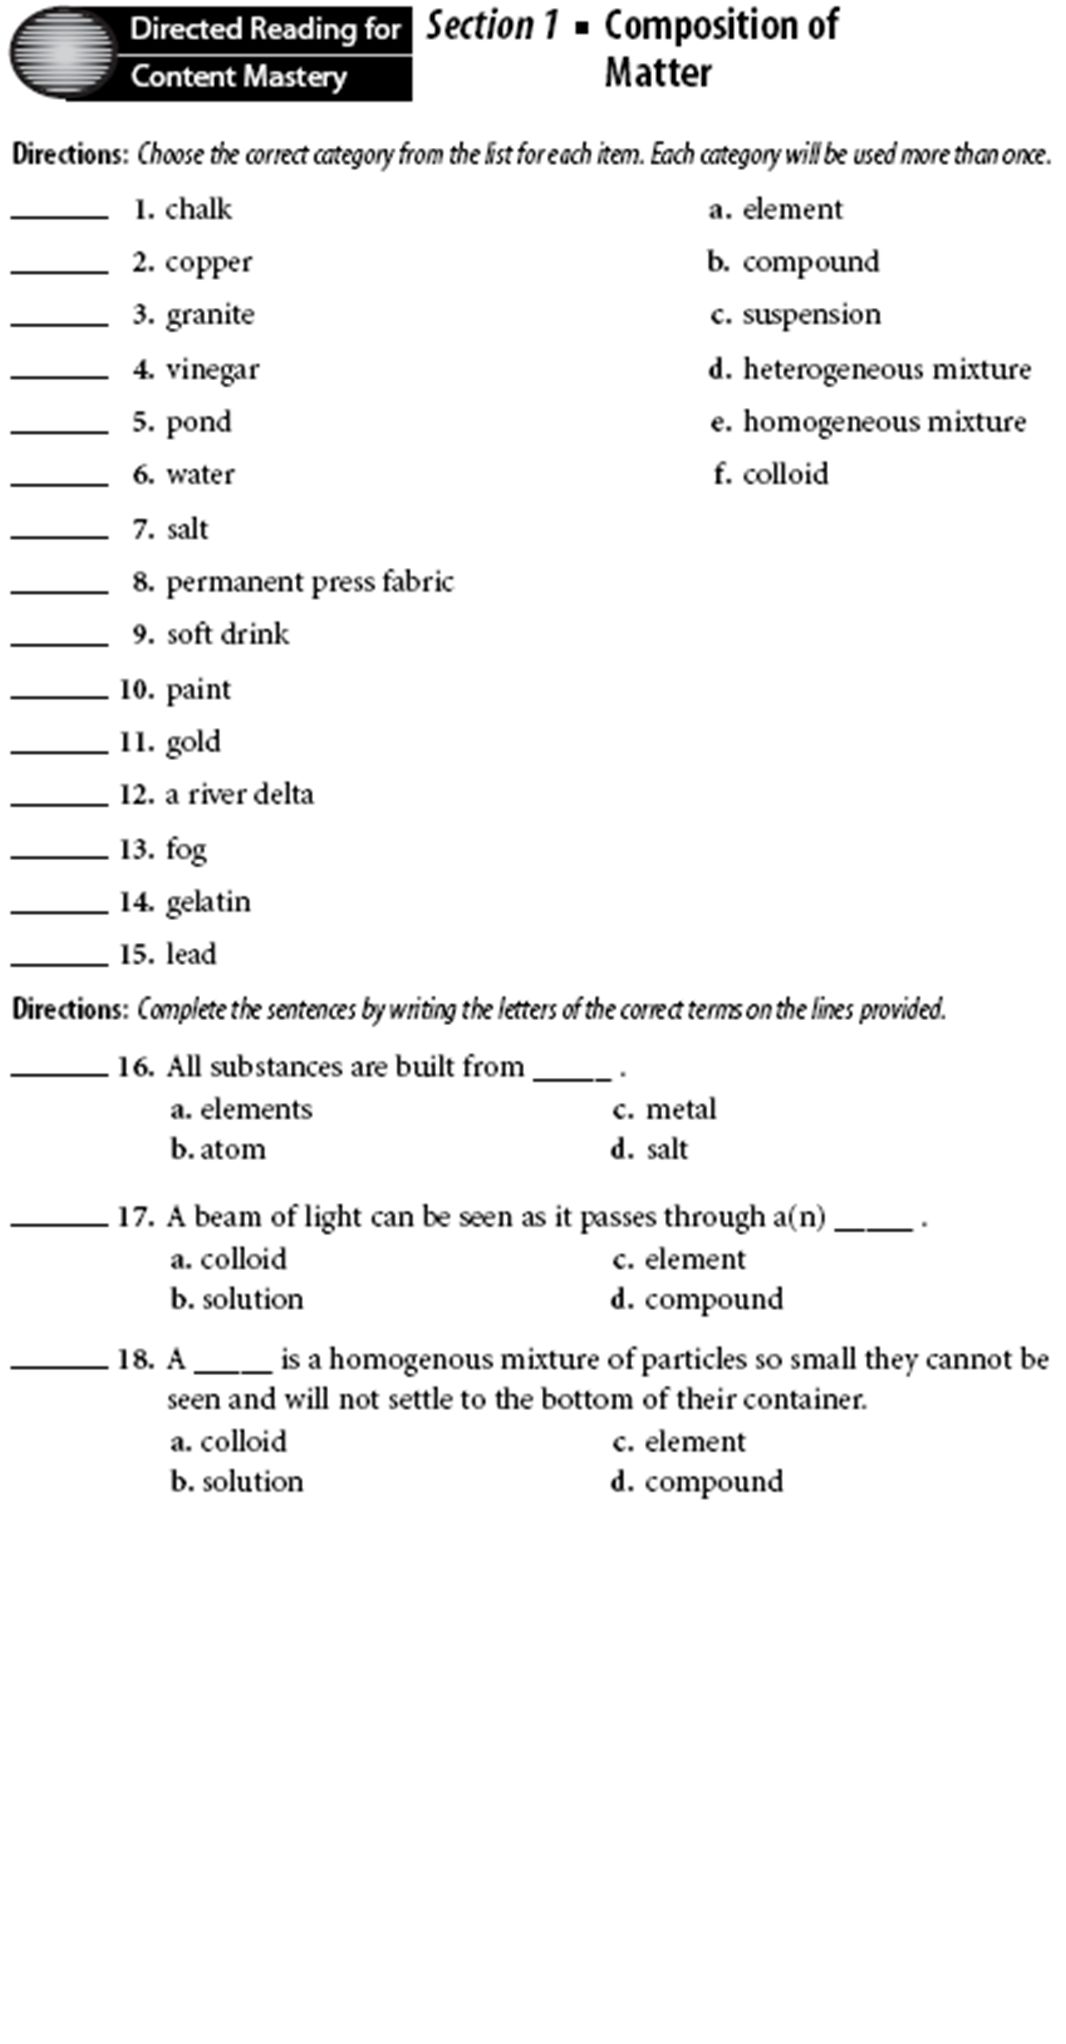 CLASSIFICATION OF MATTER - ppt video online download Inside Classifying Matter Worksheet Answers